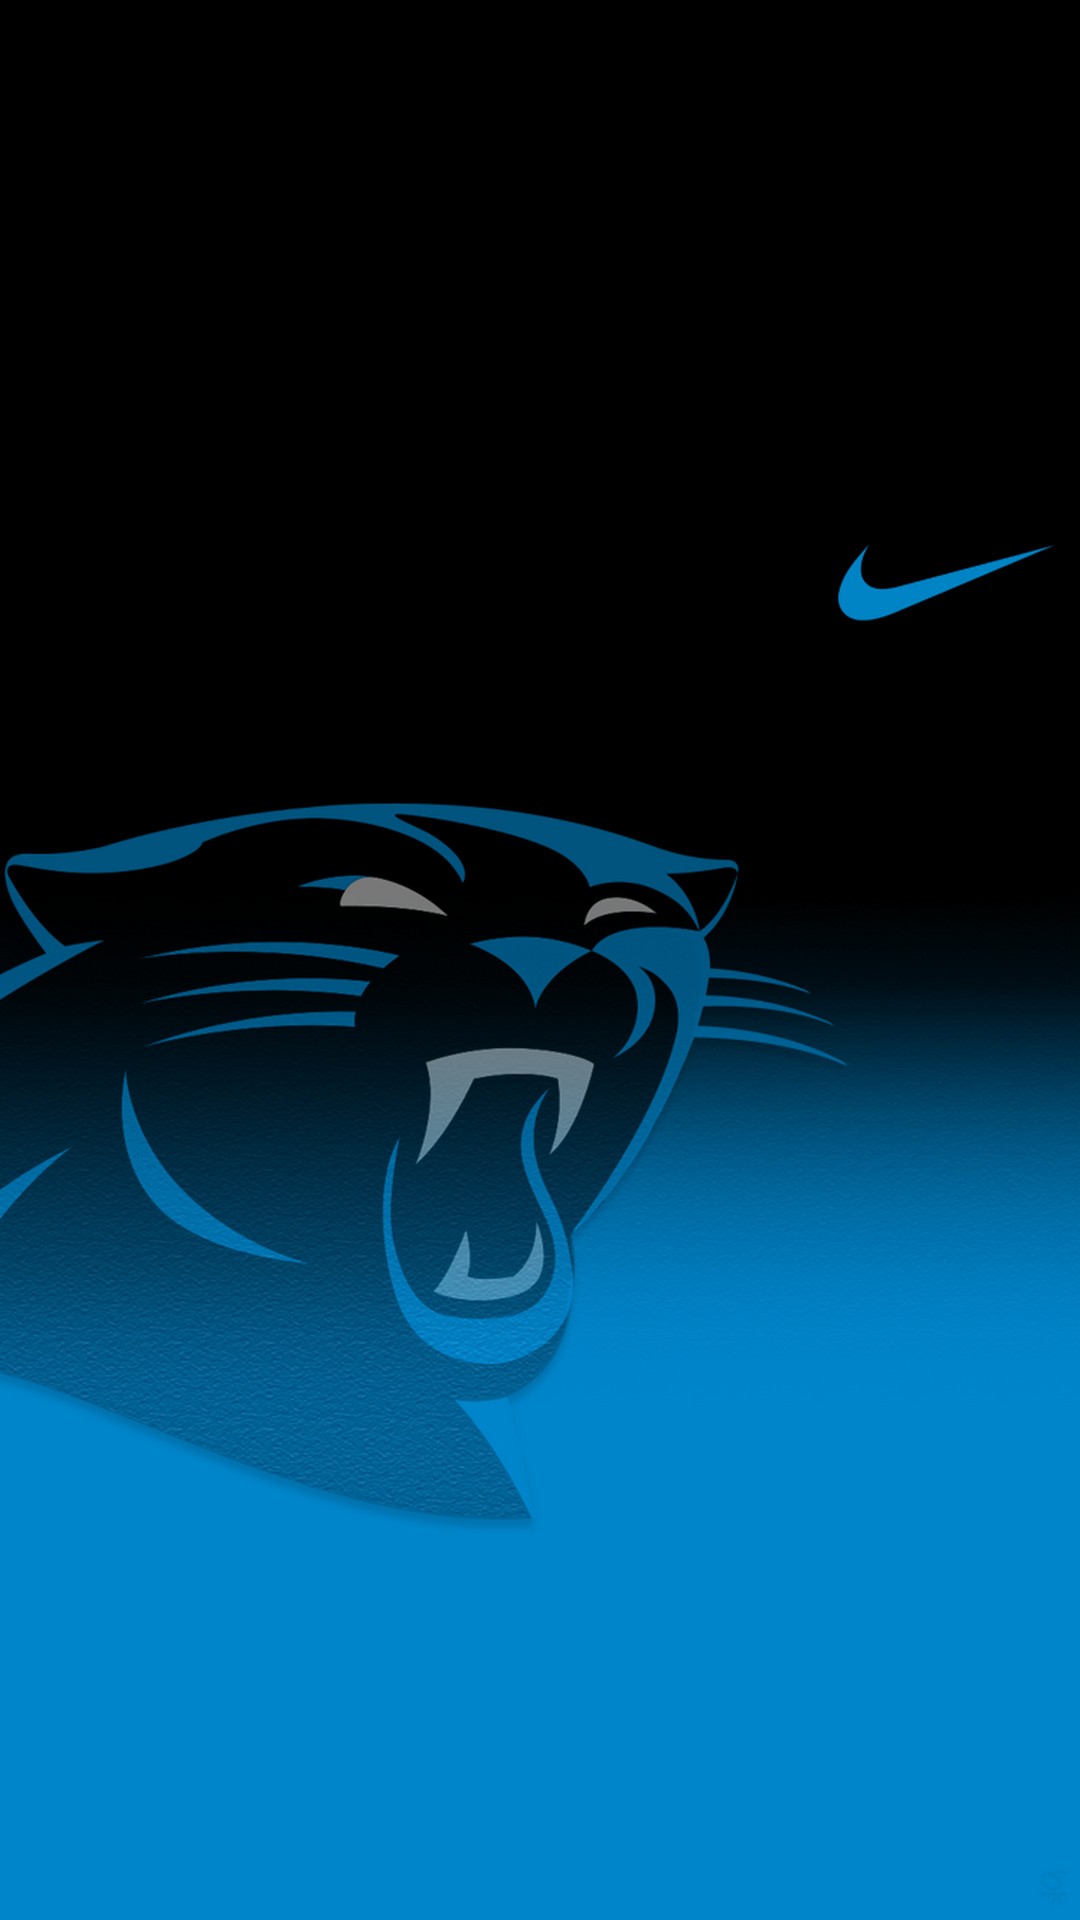 Carolina Panthers iPhone Wallpaper Home Screen With high-resolution 1080X1920 pixel. Download and set as wallpaper for Apple iPhone X, XS Max, XR, 8, 7, 6, SE, iPad, Android